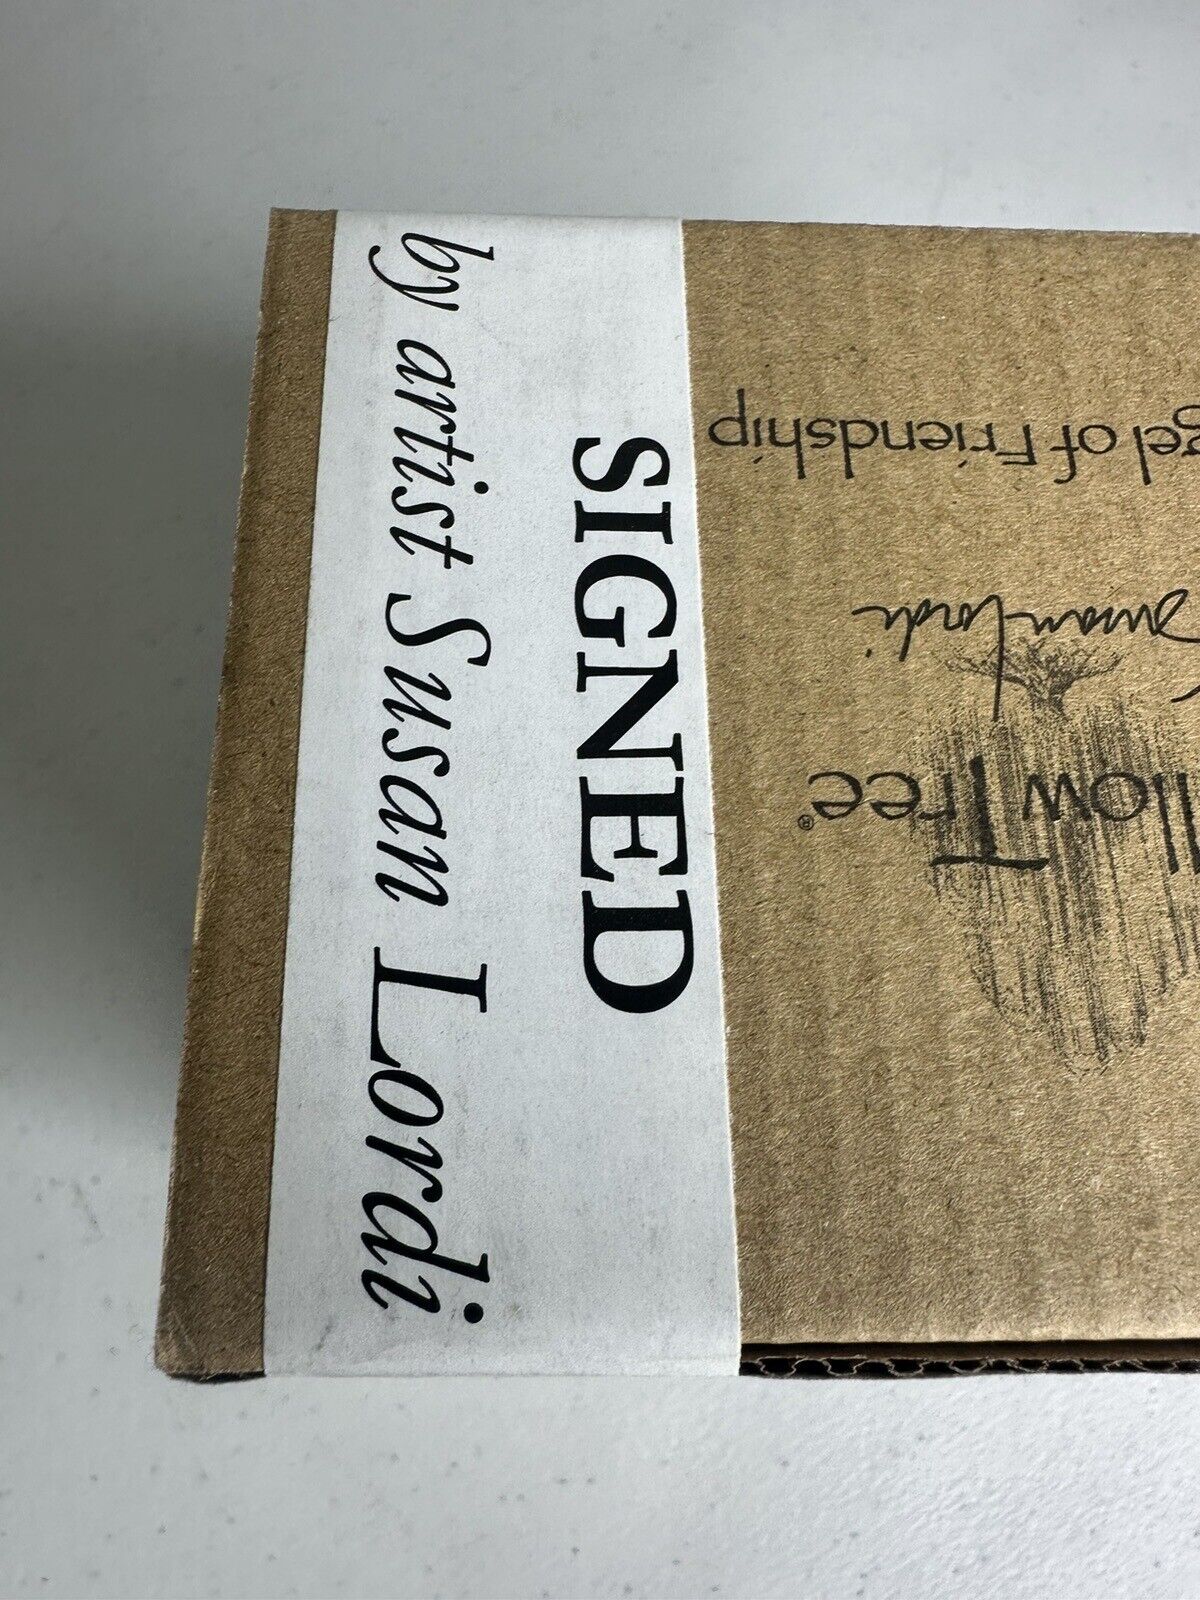 Rare Sealed & Signed 2009 Willow Tree Angel of Friendship by Susan Lordi - TreasuTiques